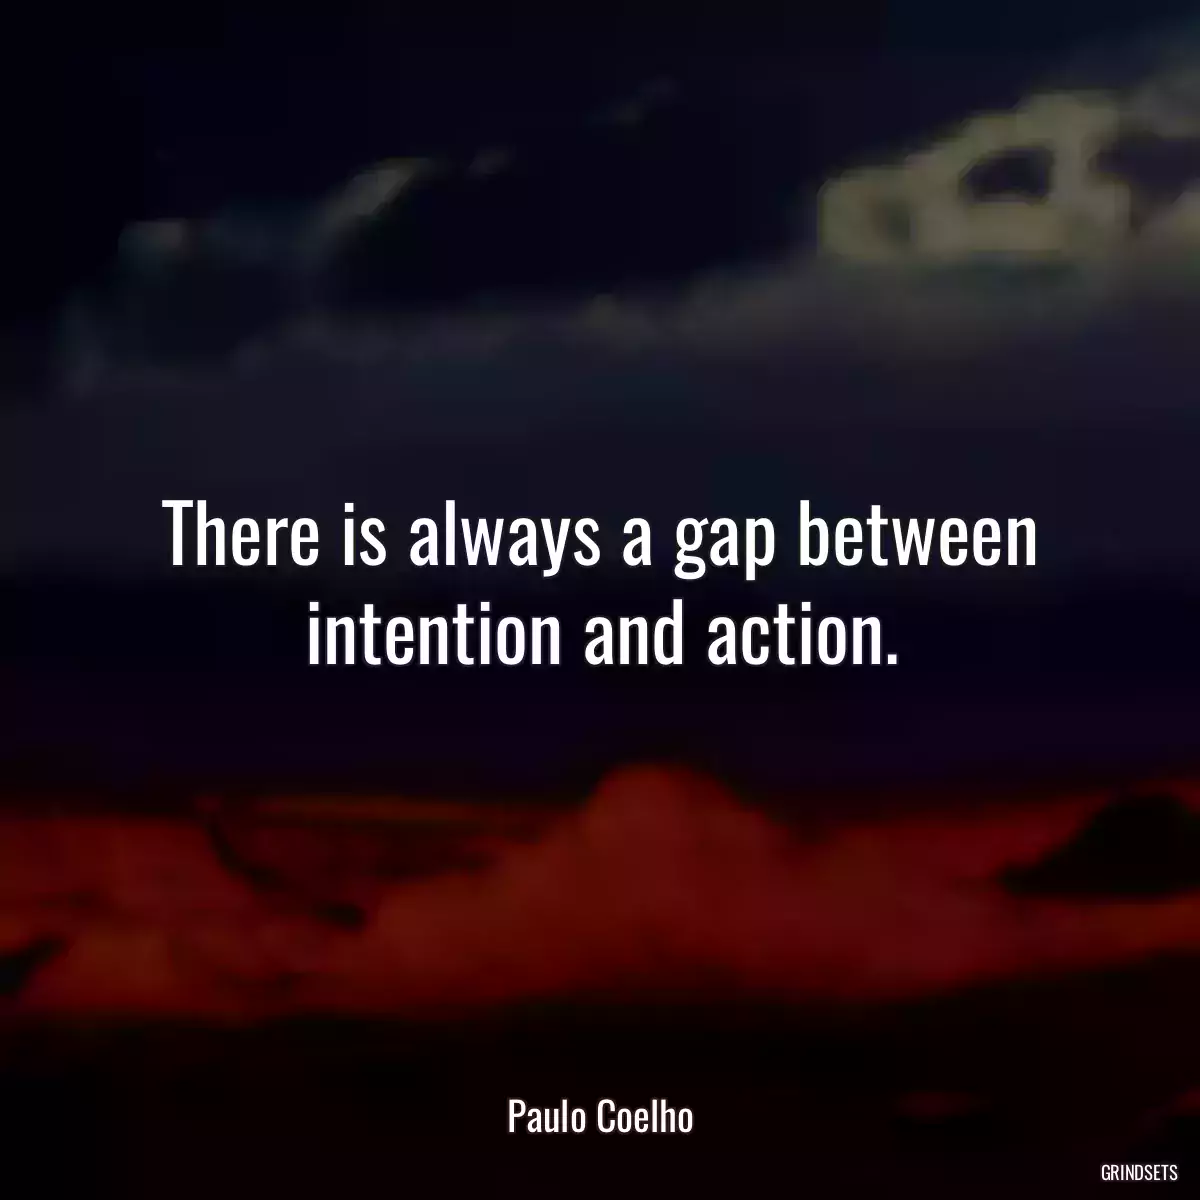 There is always a gap between intention and action.